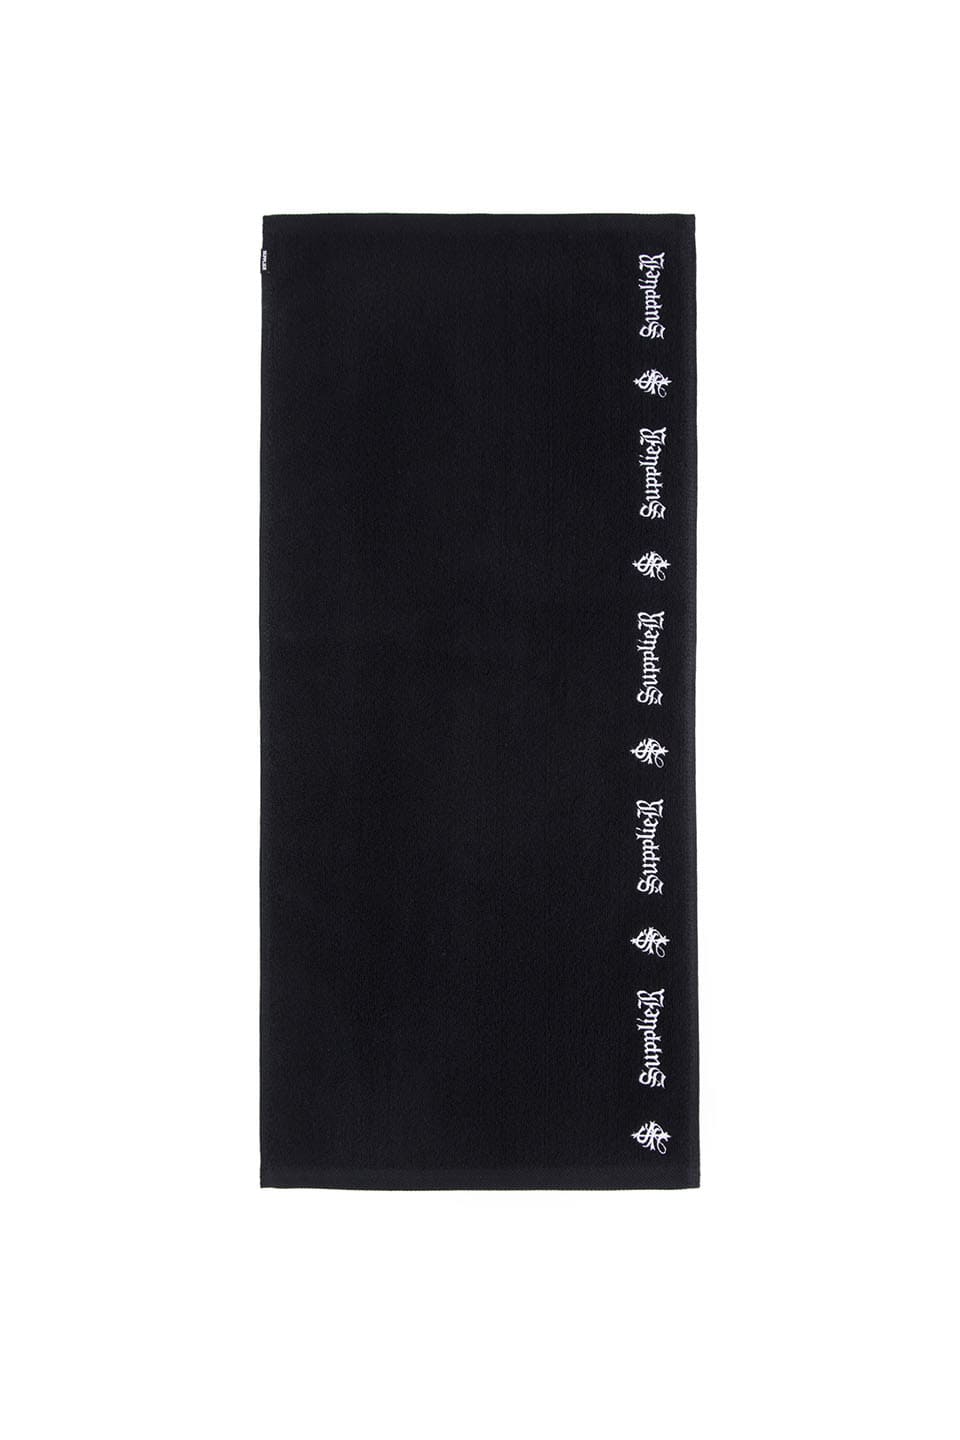 Supplier Embroidered Towel